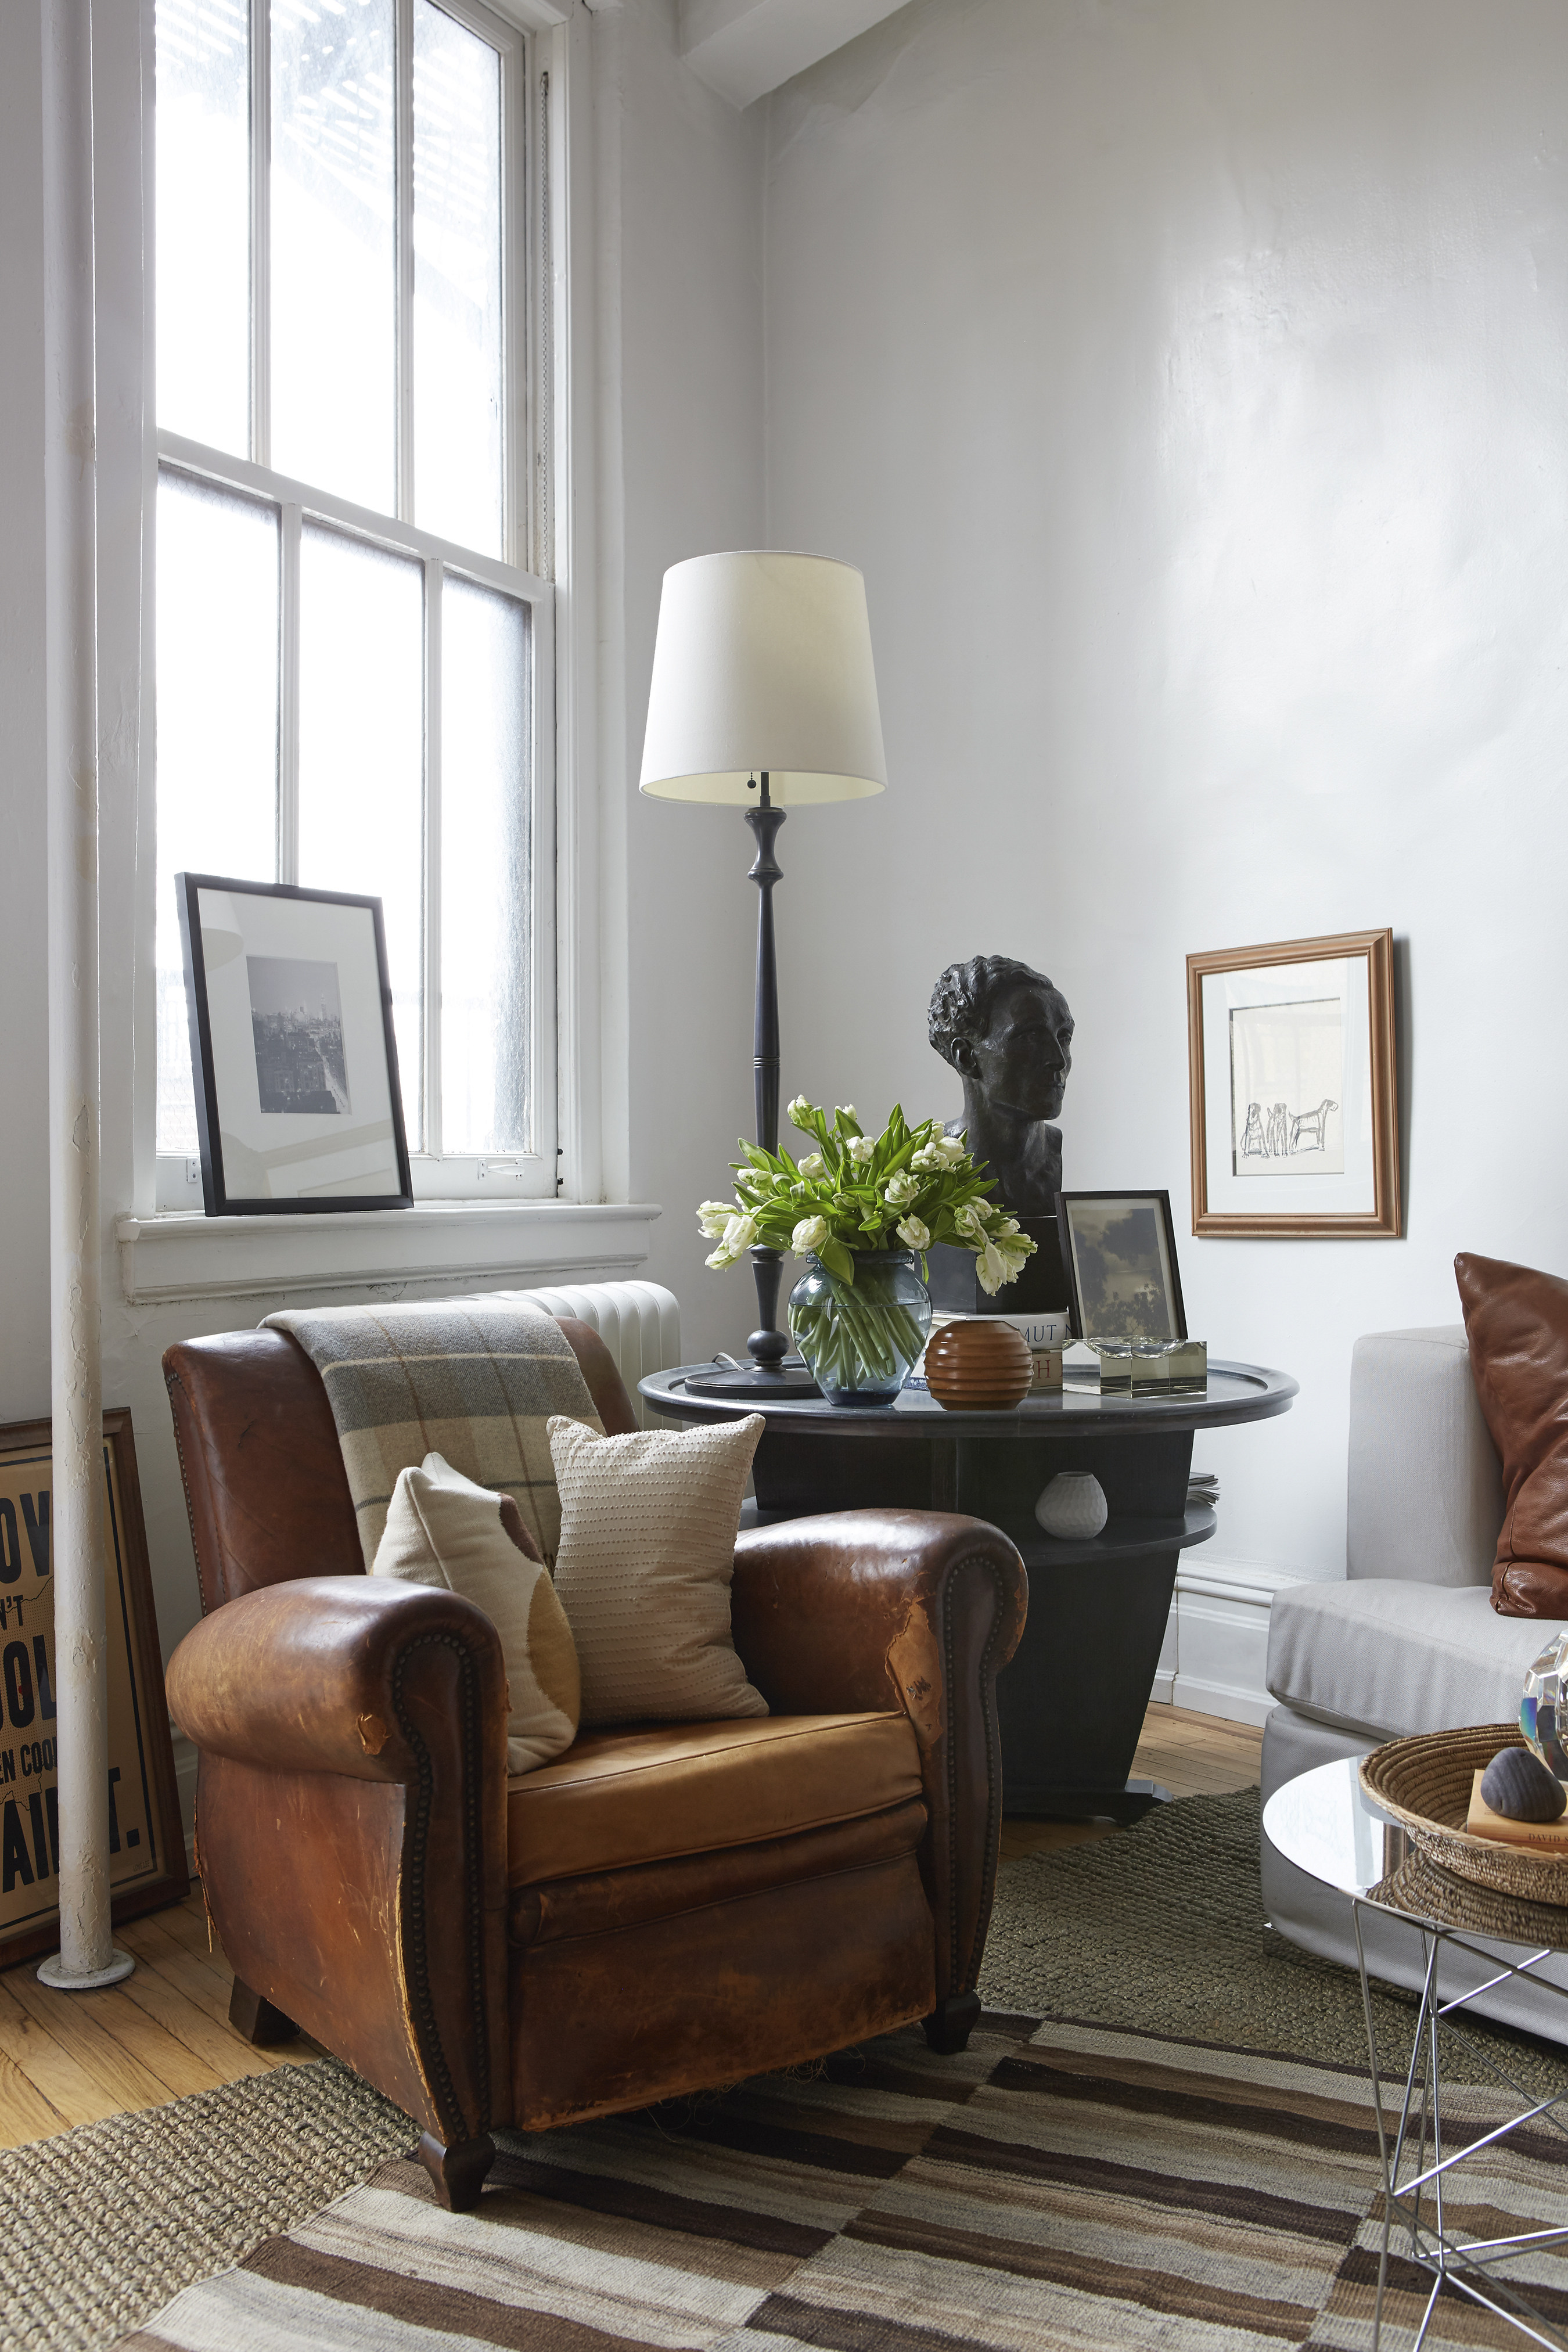 A vintage leather armchair and two-tiered table take pride of place in a living room. Designer Dan Mazzarini says such “slow decorating” includes an appreciation for high-quality and sustainable vintage pieces. The home trend is seen as fighting back against fast furniture brands like Ikea. Photo: AP